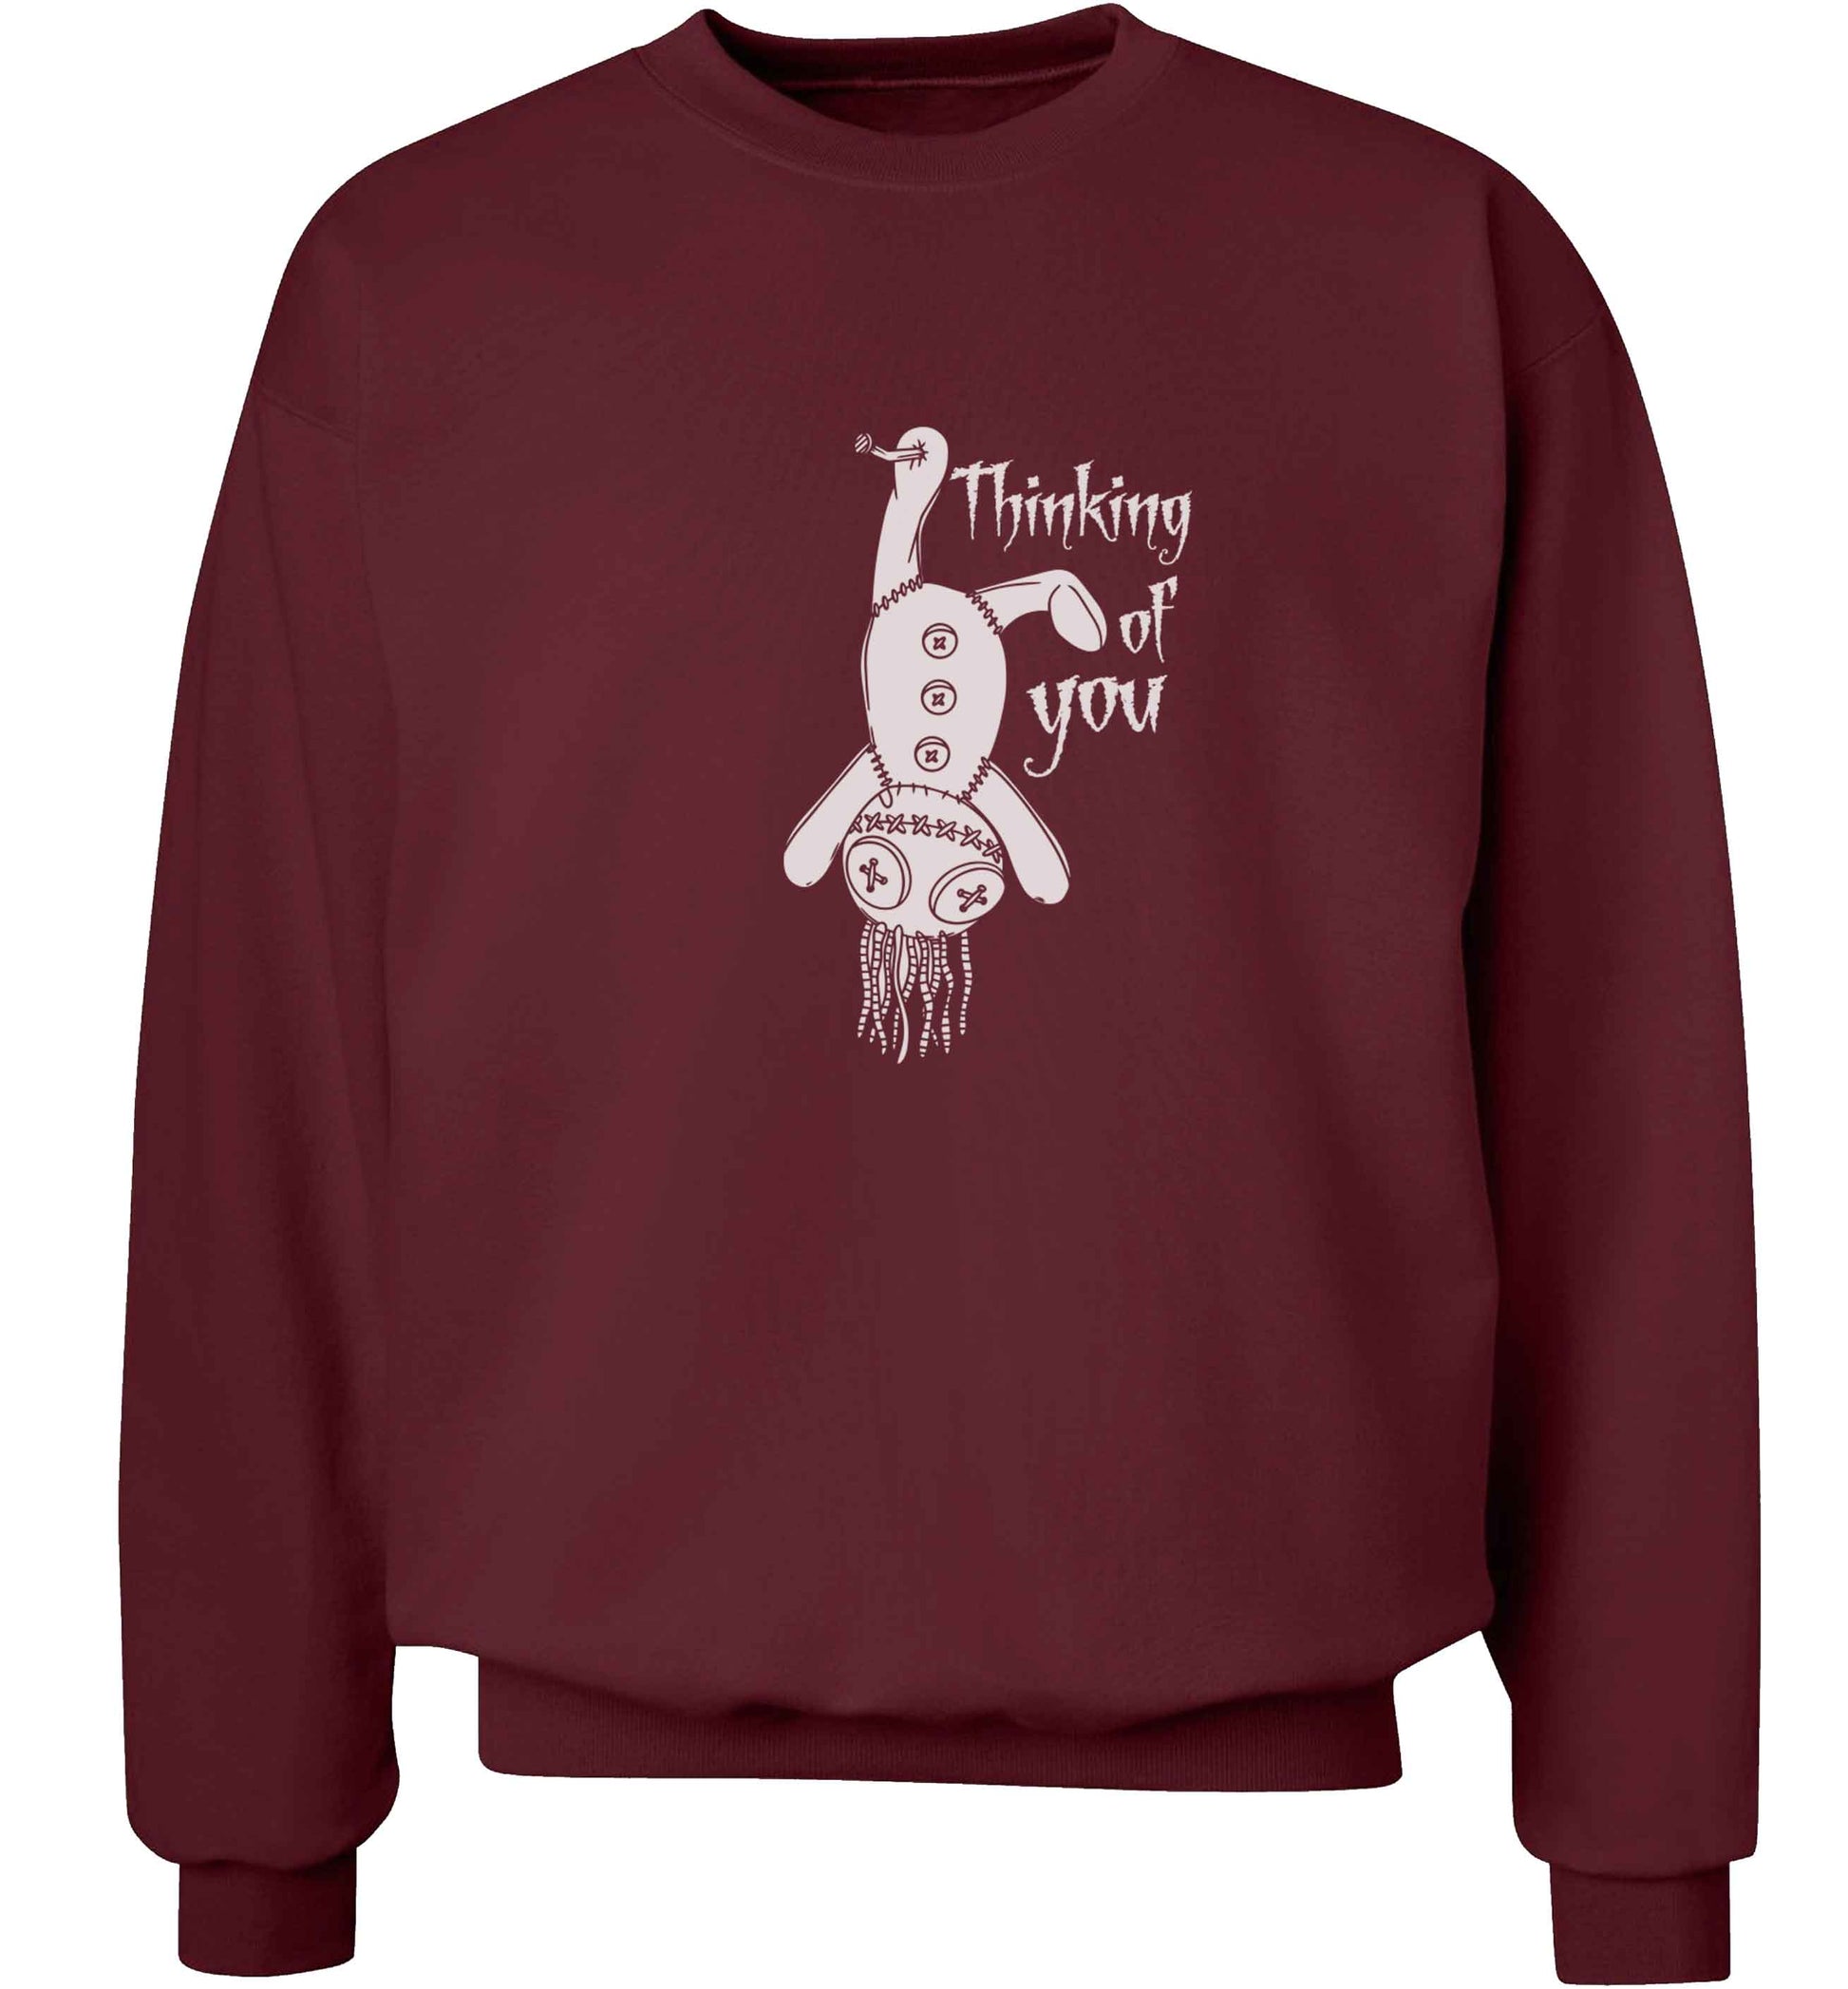 Thinking of you adult's unisex maroon sweater 2XL